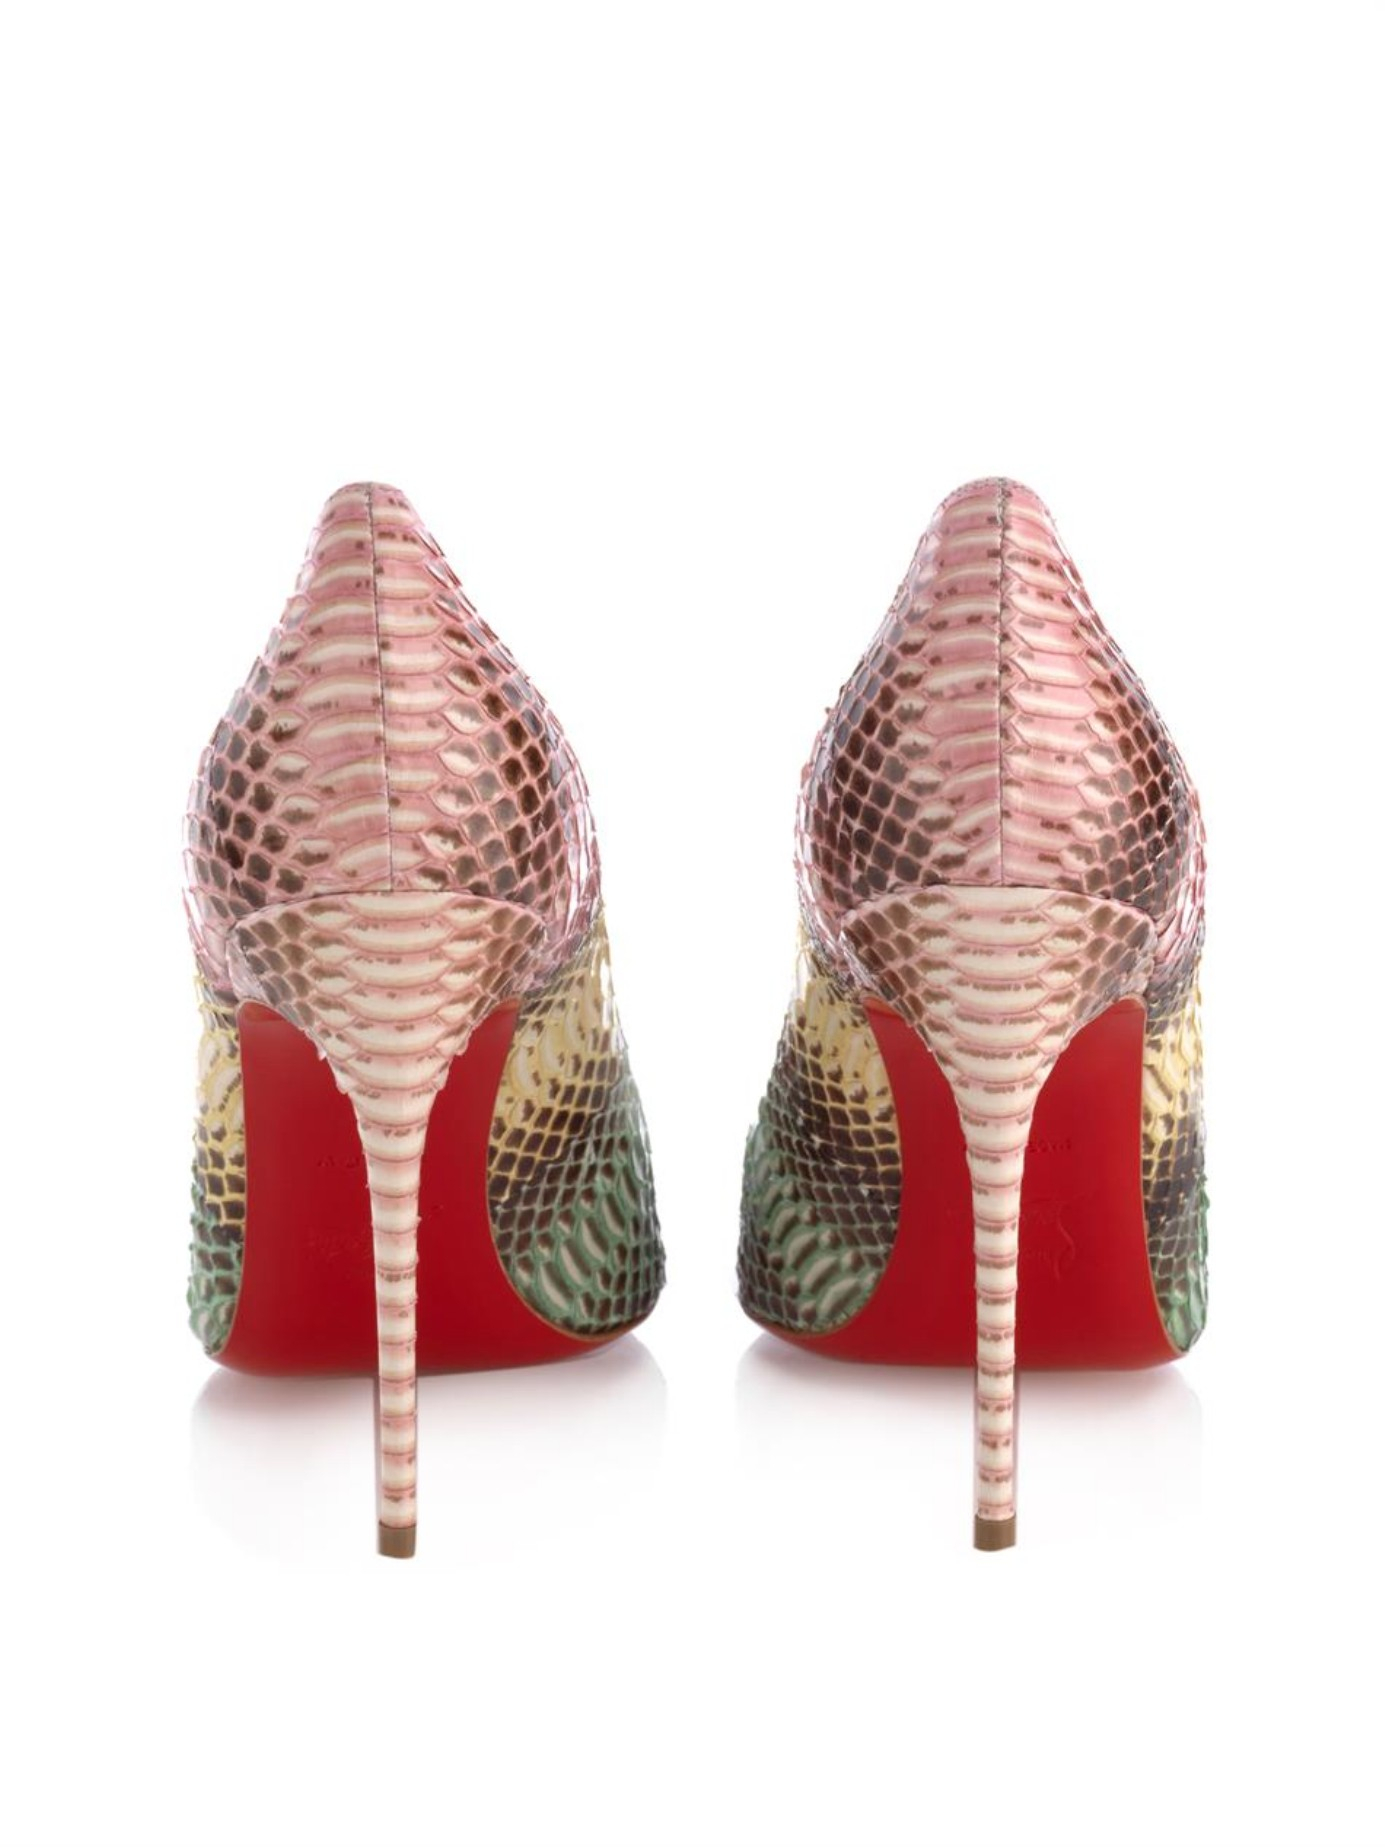 Christian louboutin Decollete 100Mm Watersnake Pumps in Multicolor ...